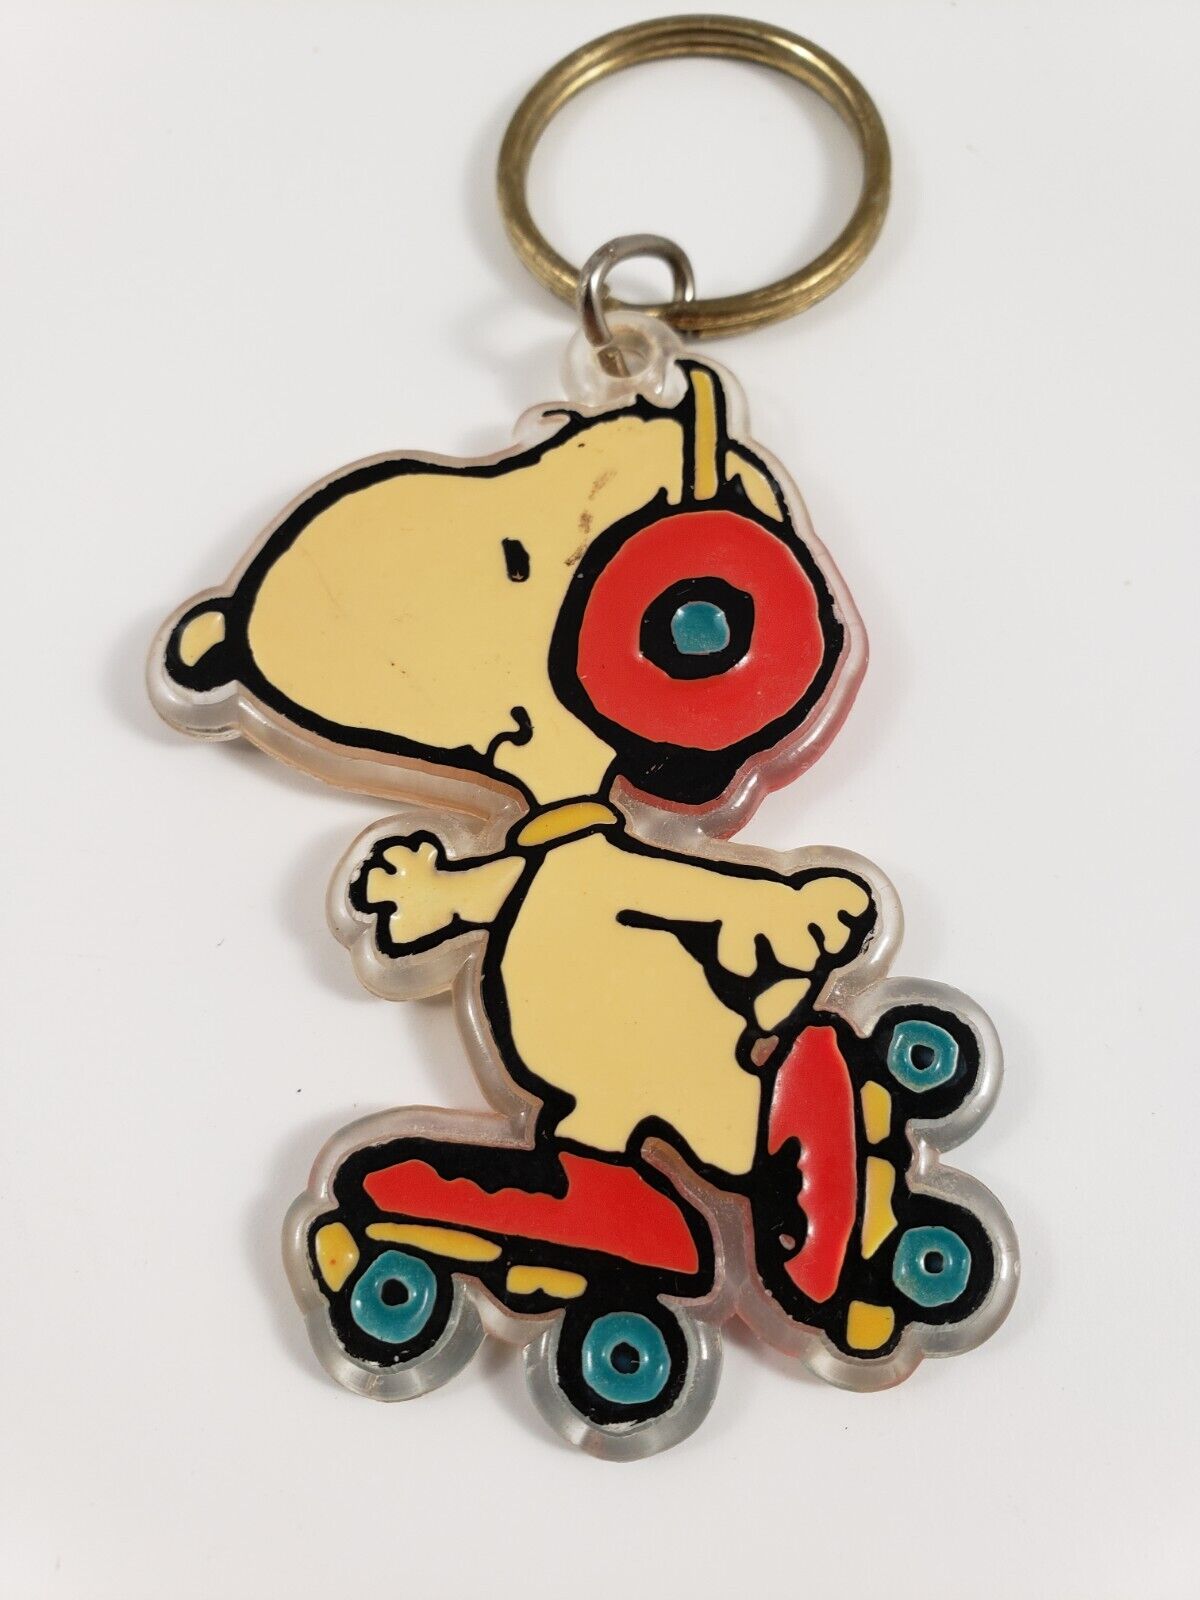 Vintage Snoopy 1958 Keychain Monogram Product Inc. Made in St.  Lucia, W.I. RARE